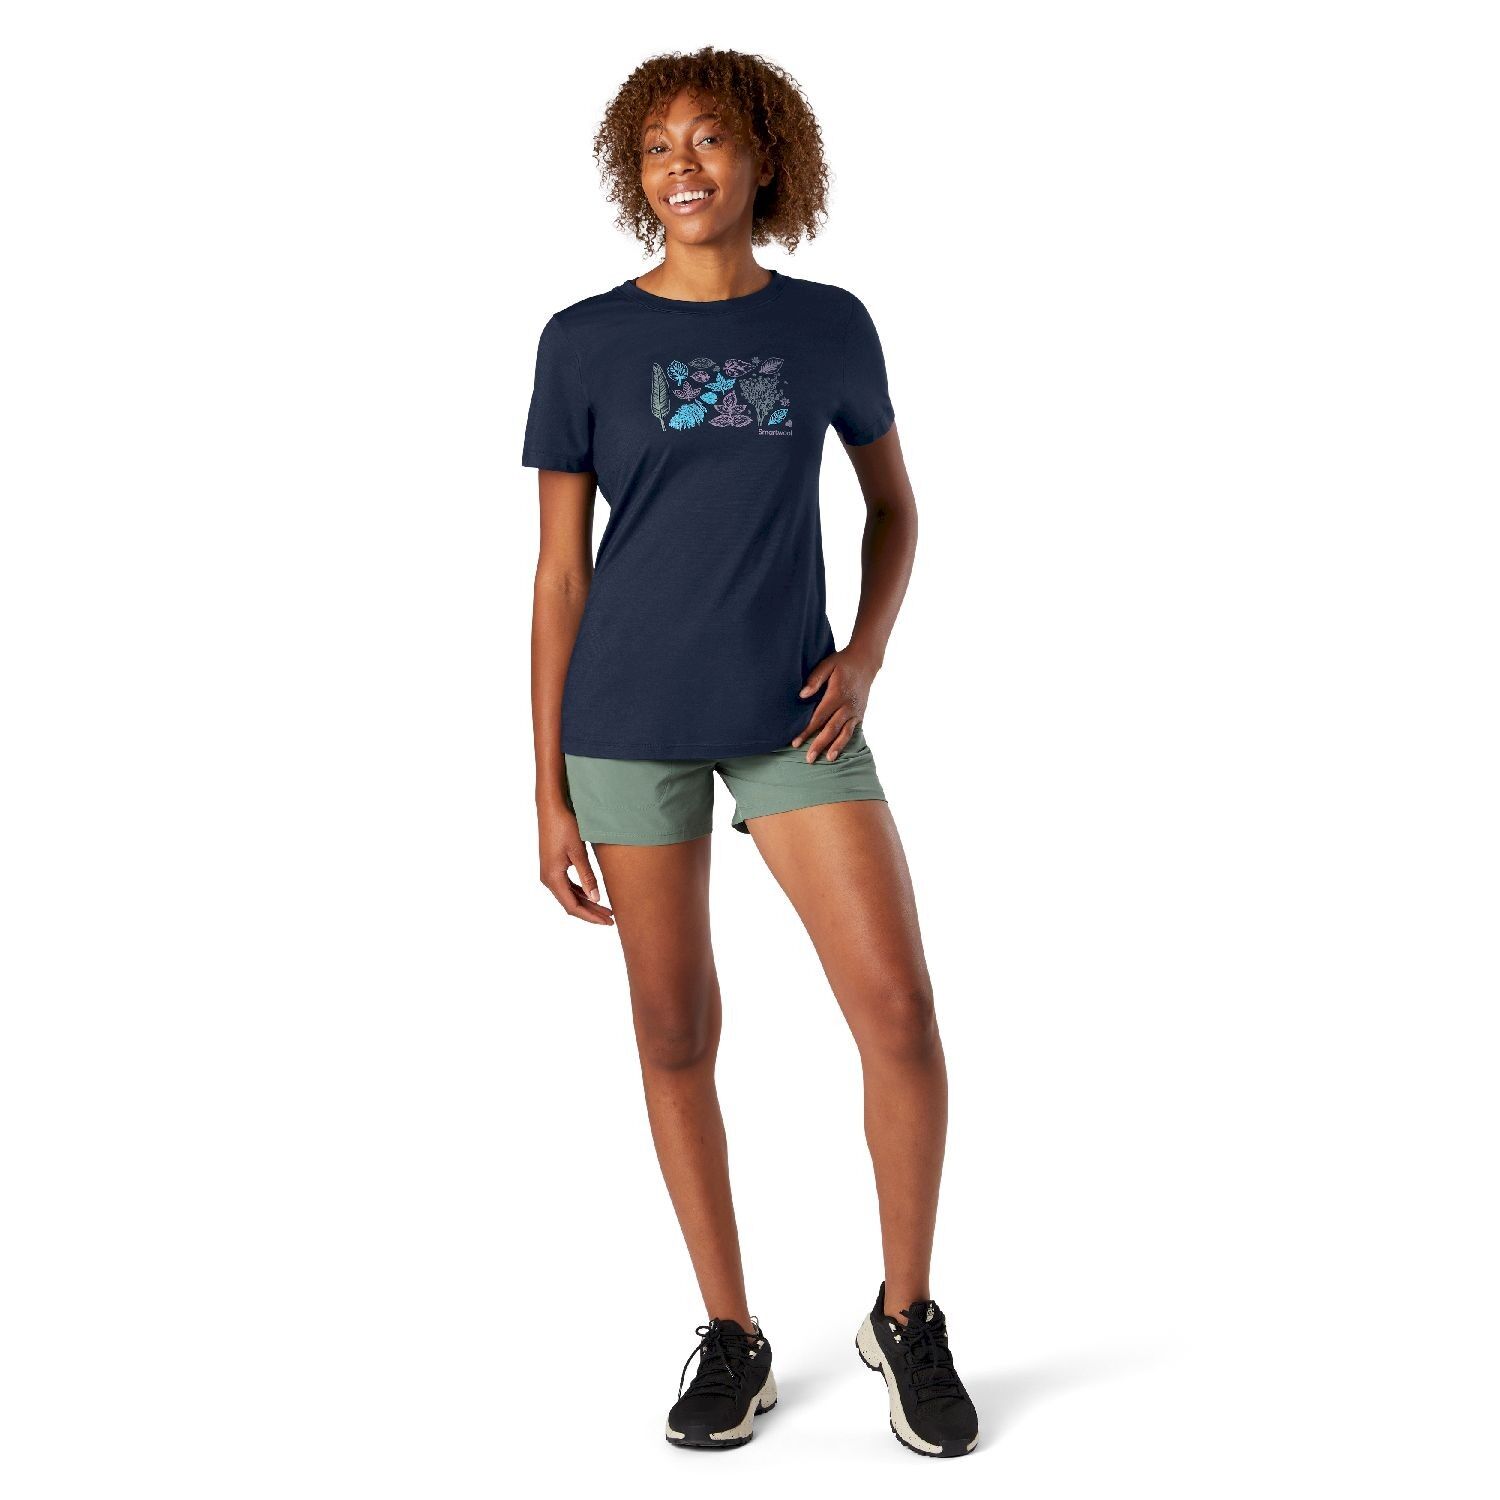 Smartwool Merino Sport 150 Spring Leaves Graphic Tee - T-shirt - Donna